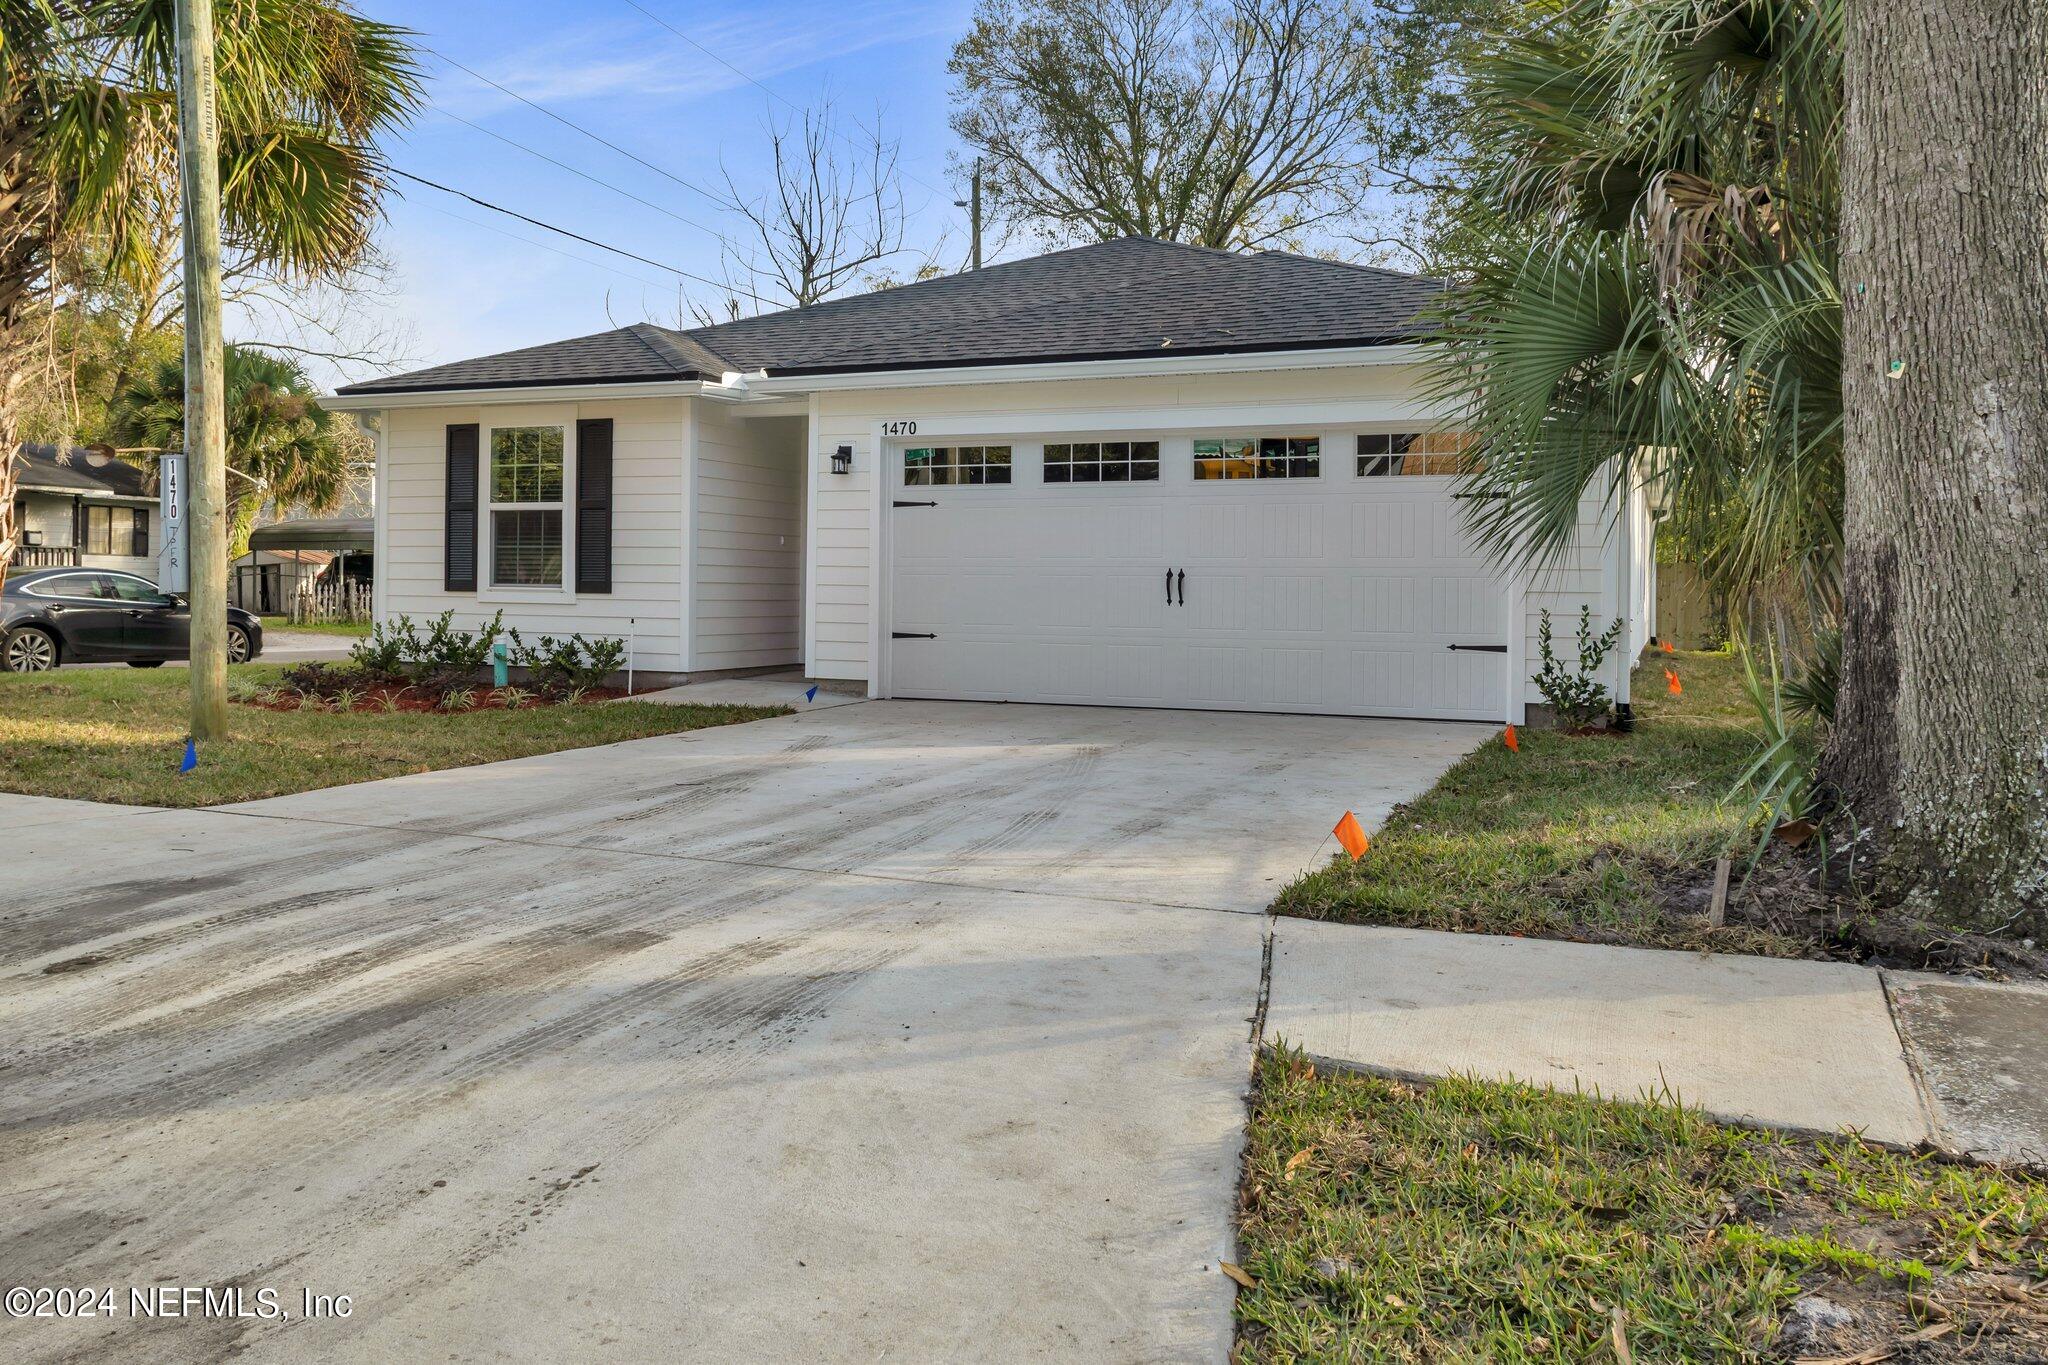 Jacksonville, FL home for sale located at 1470 W 21st Street, Jacksonville, FL 32209